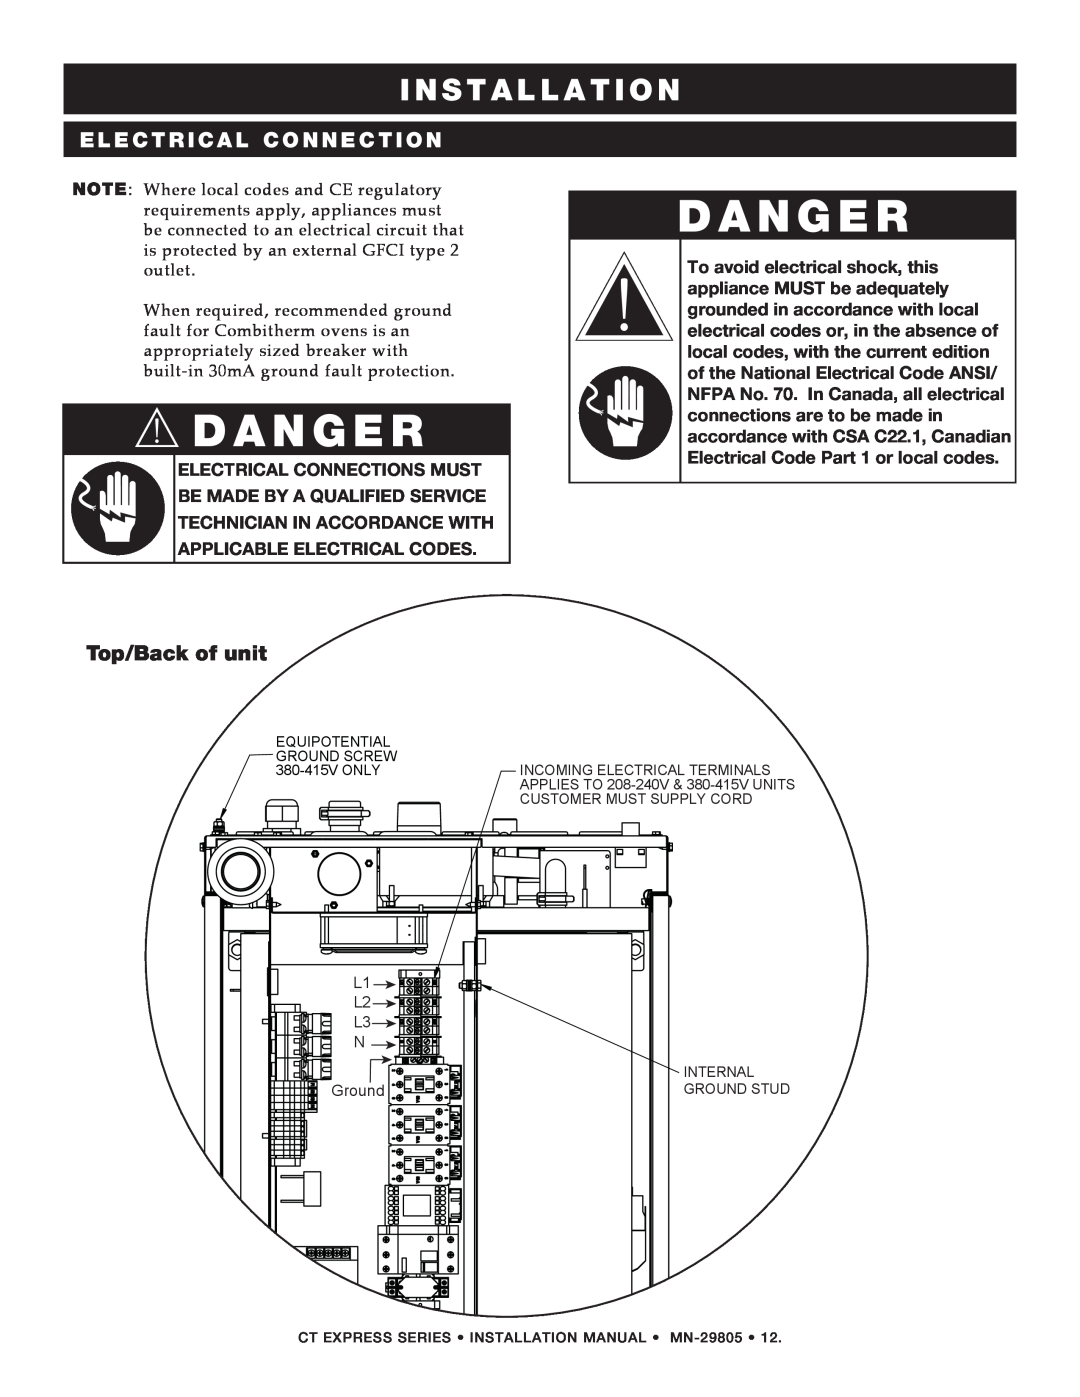 Alto-Shaam Combination Oven/Steamer manual Top/Back of unit, Danger, I N S T A L L A T I O N, Electrical Connection 